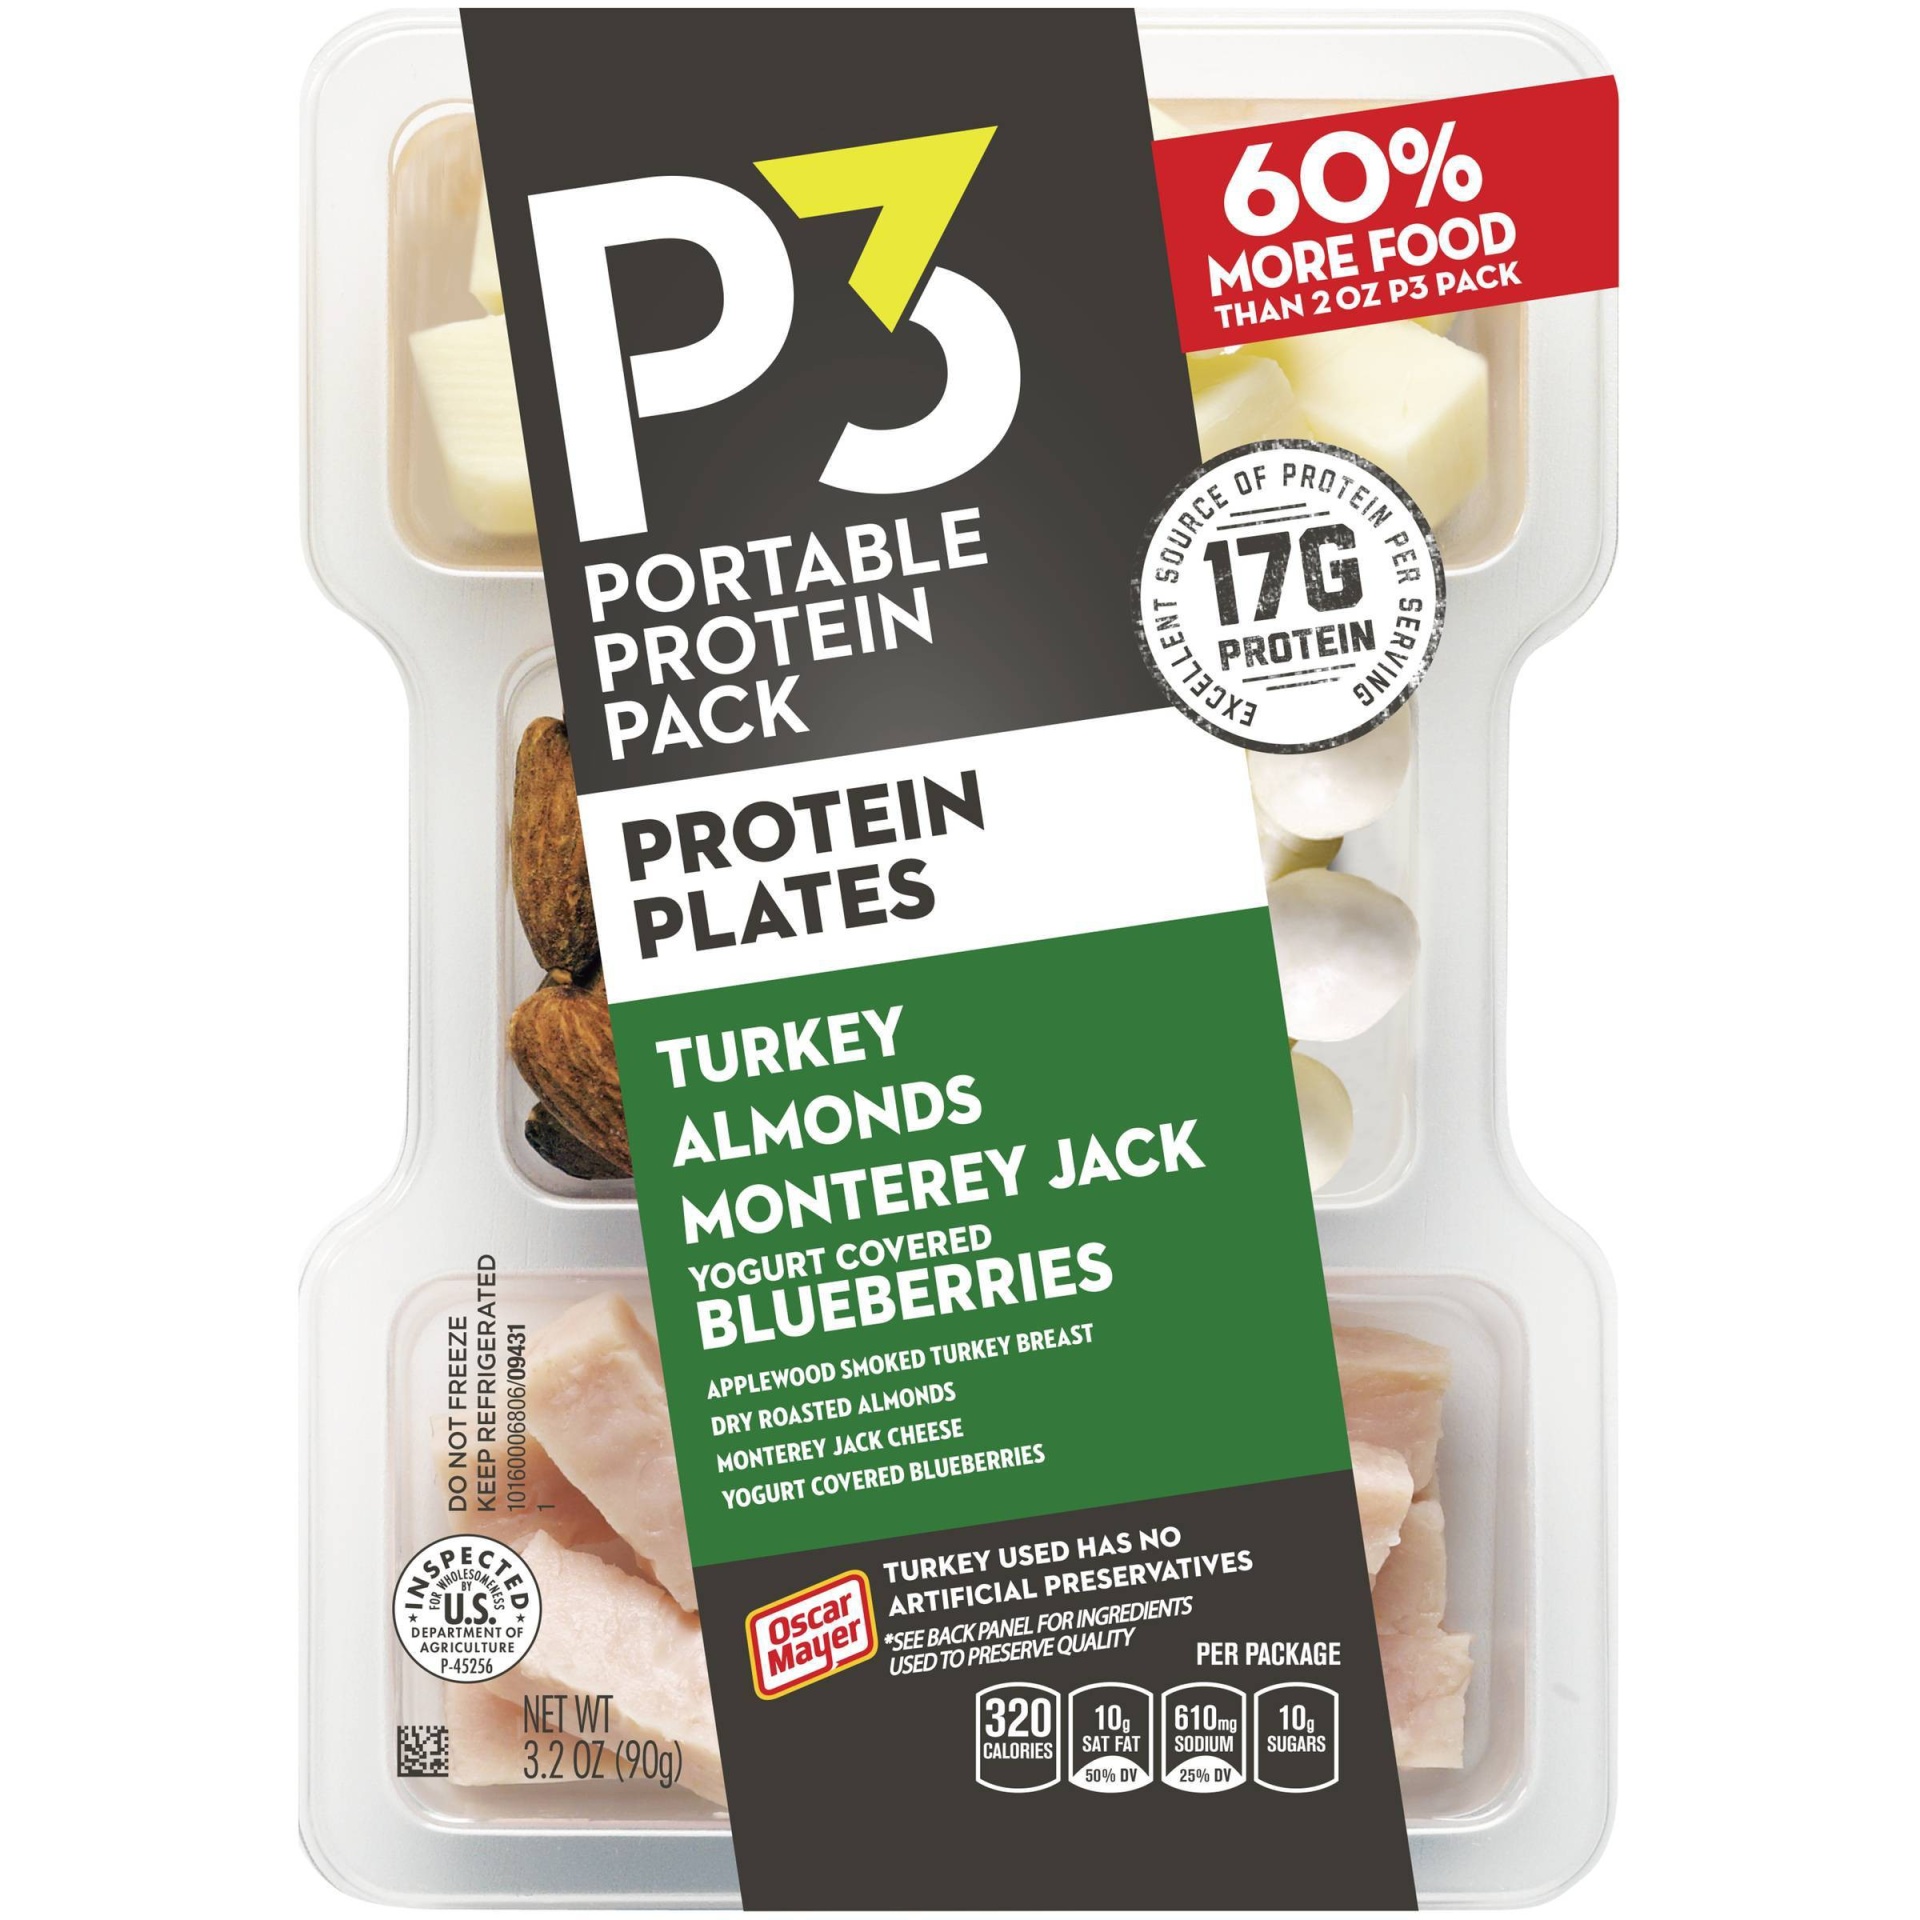 slide 1 of 6, P3 Portable Protein Snack Pack & Protein Plate with Turkey, Almonds, Jack Cheese & Yogurt Covered Blueberries Tray, 3.2 oz